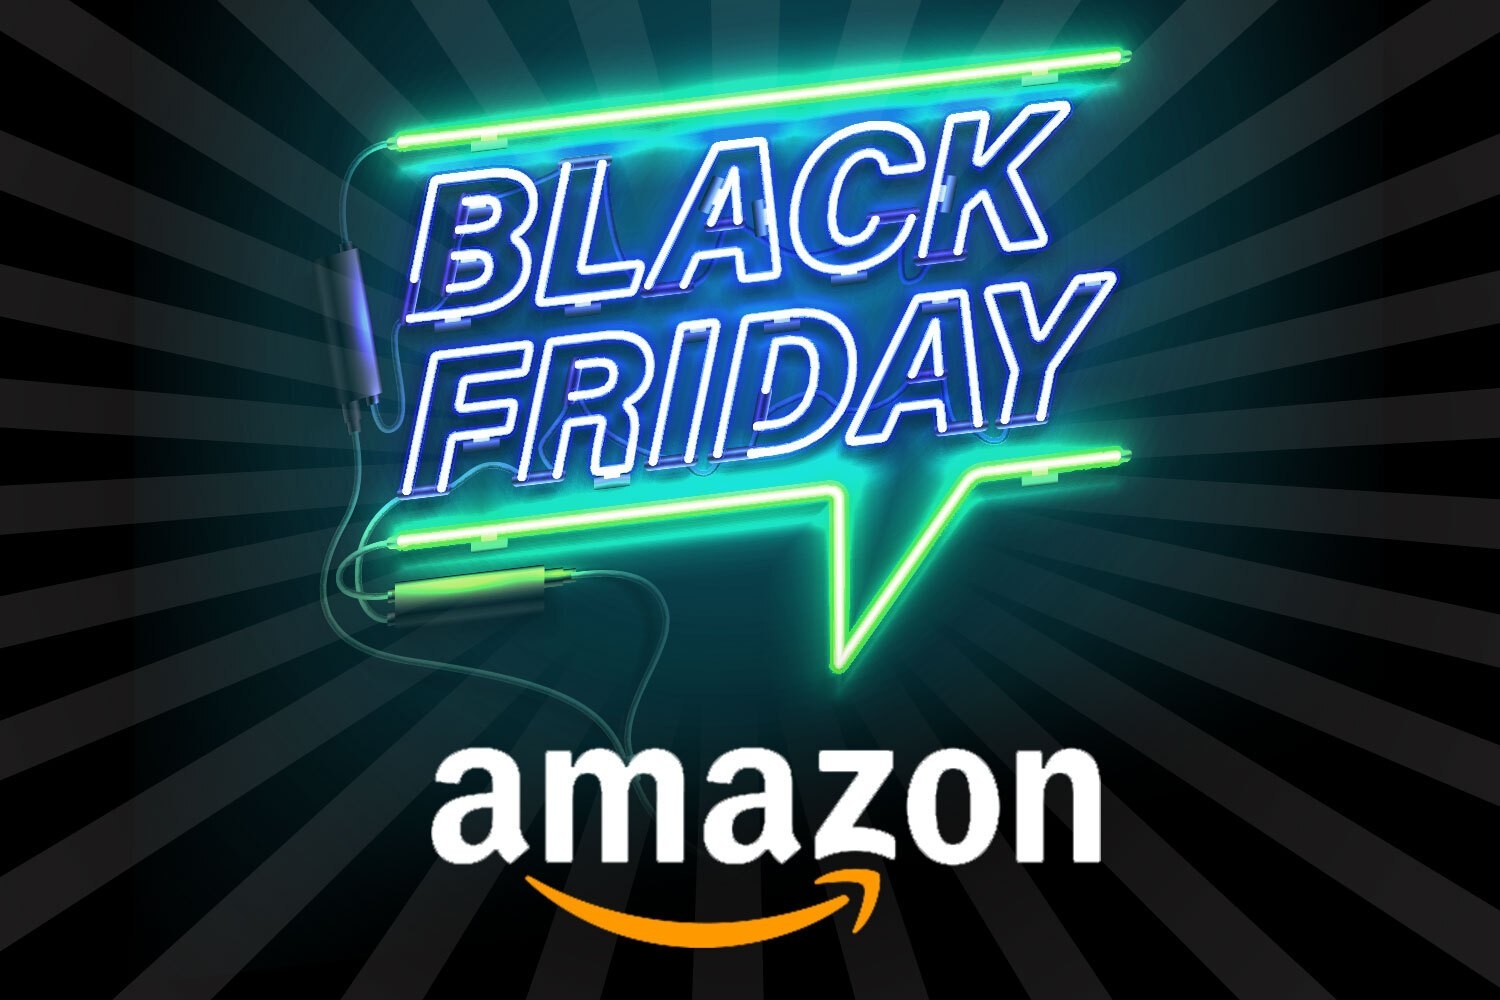 Here's our Top 10 best handpicked Amazon Black Friday tech deals!